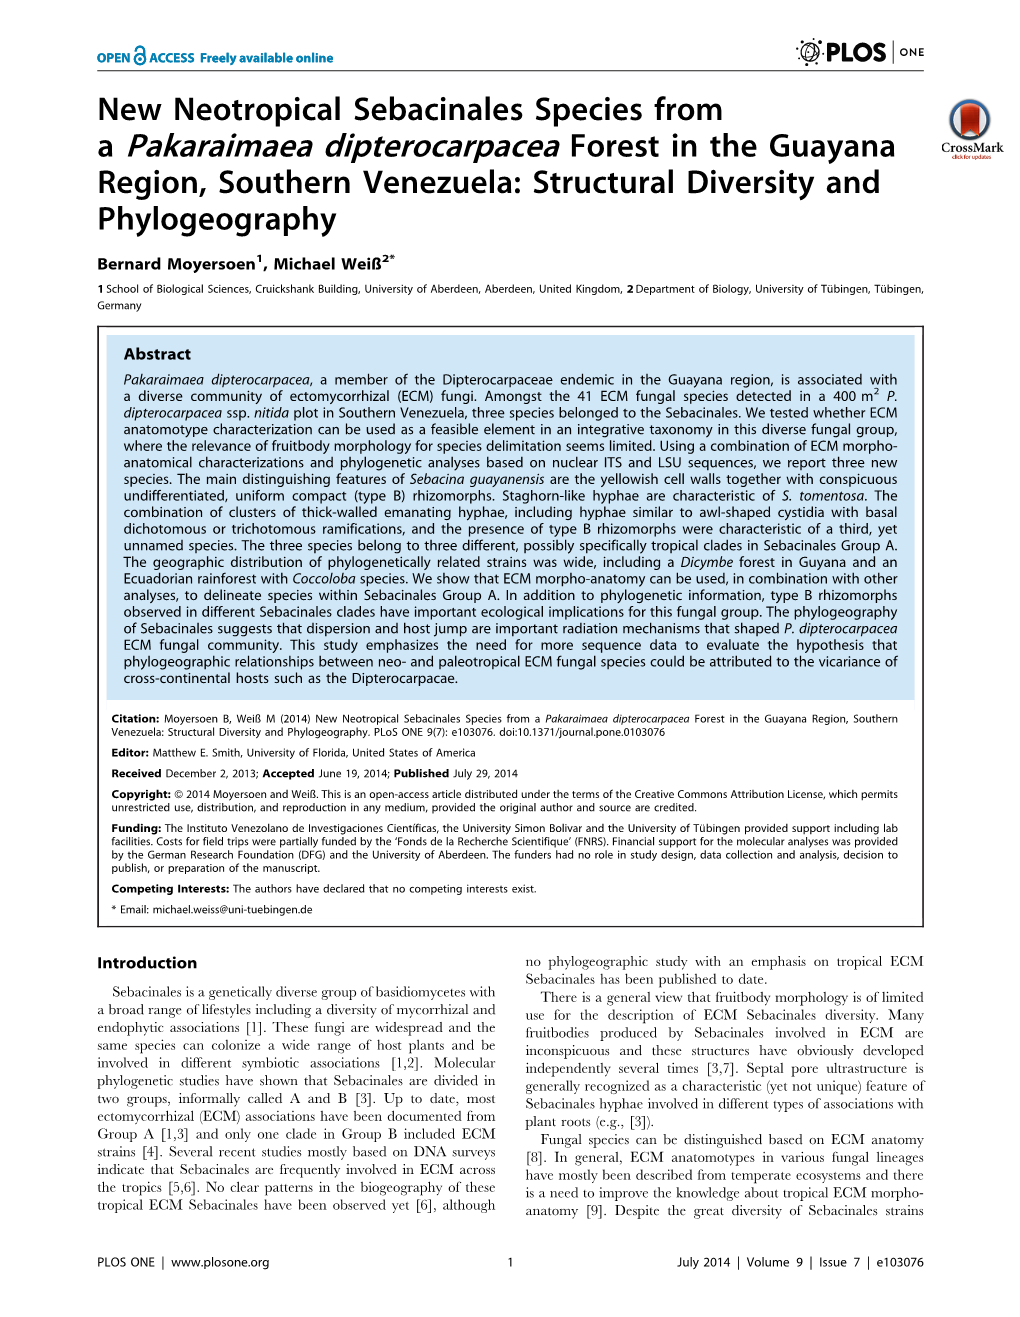 A Pakaraimaea Dipterocarpacea Forest in the Guayana Region, Southern Venezuela: Structural Diversity and Phylogeography